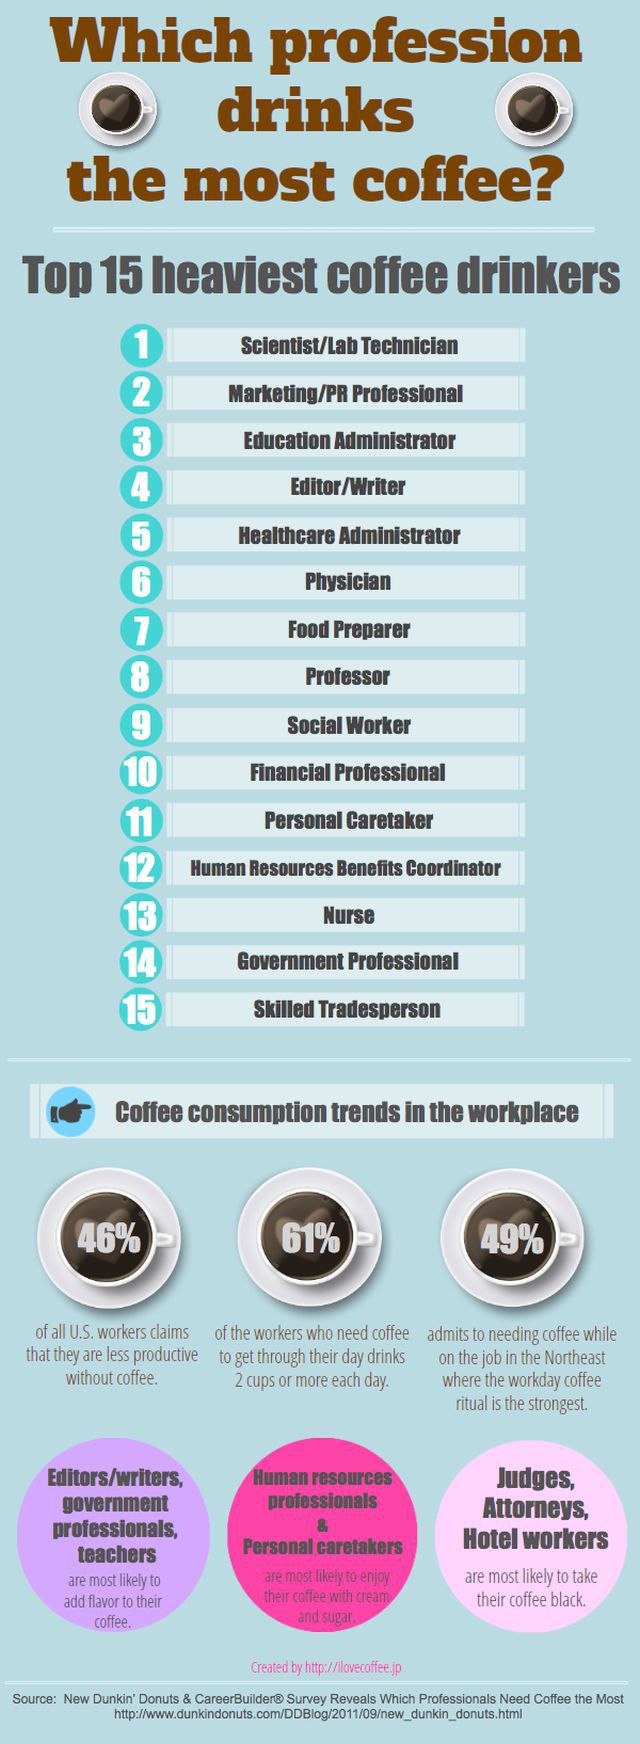 Who Drinks the Most Coffee at Work